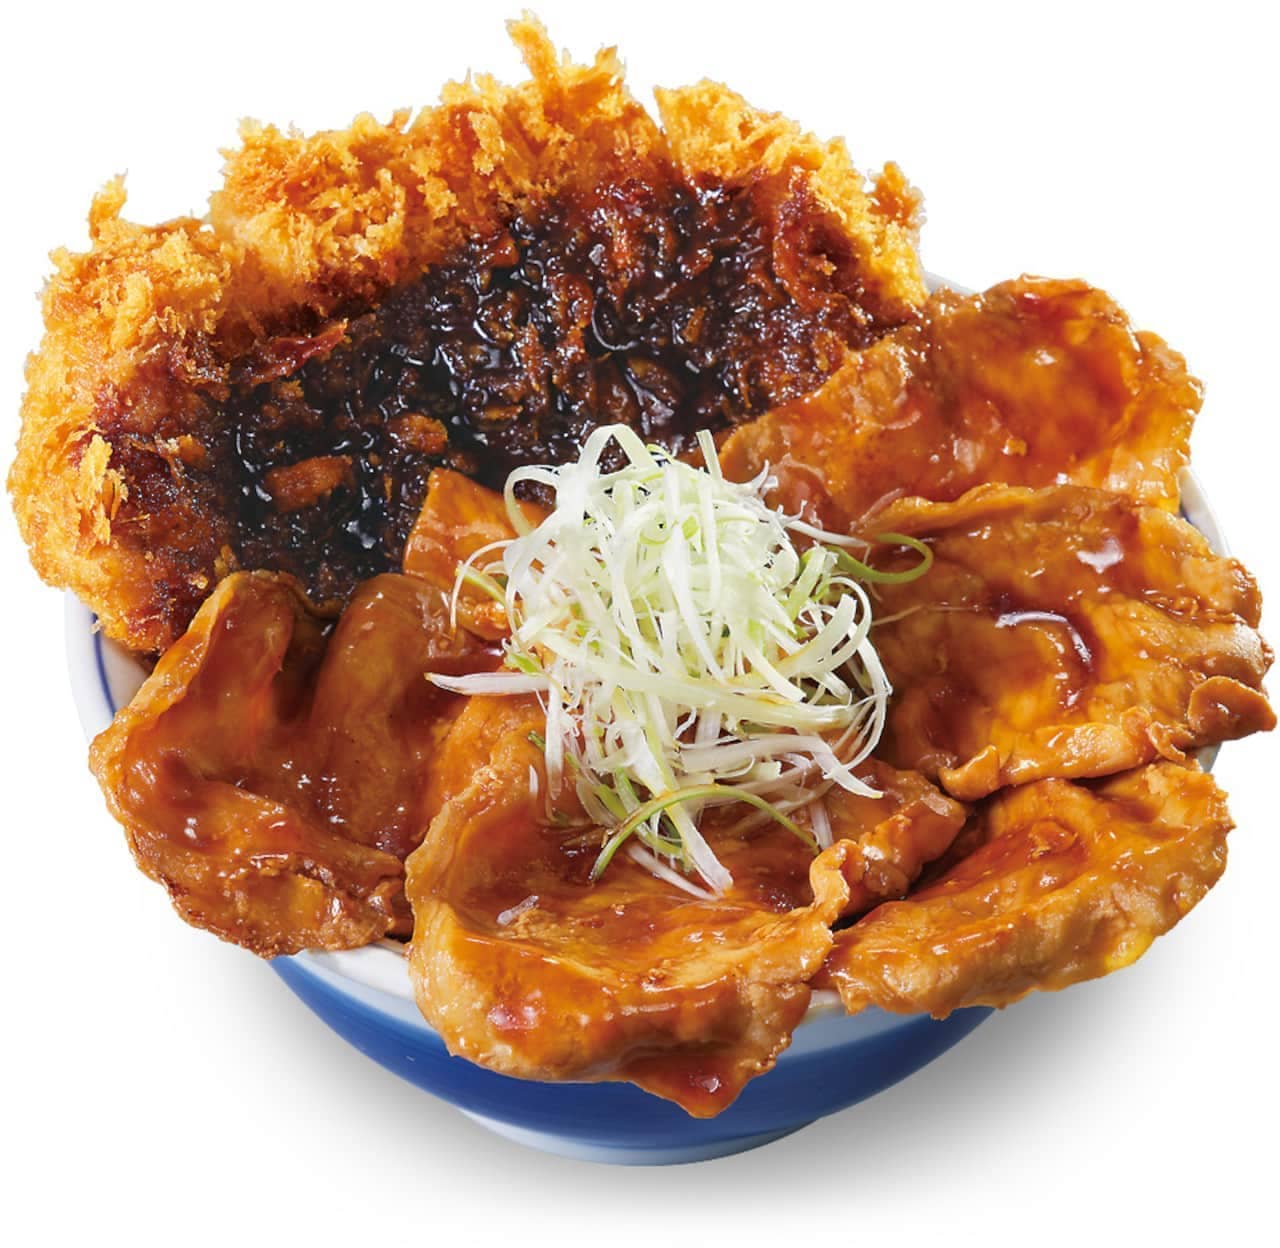 Katsuya "Meat-enhanced loin cutlet and pork yakiniku in a bowl with a combination of pork and meat".